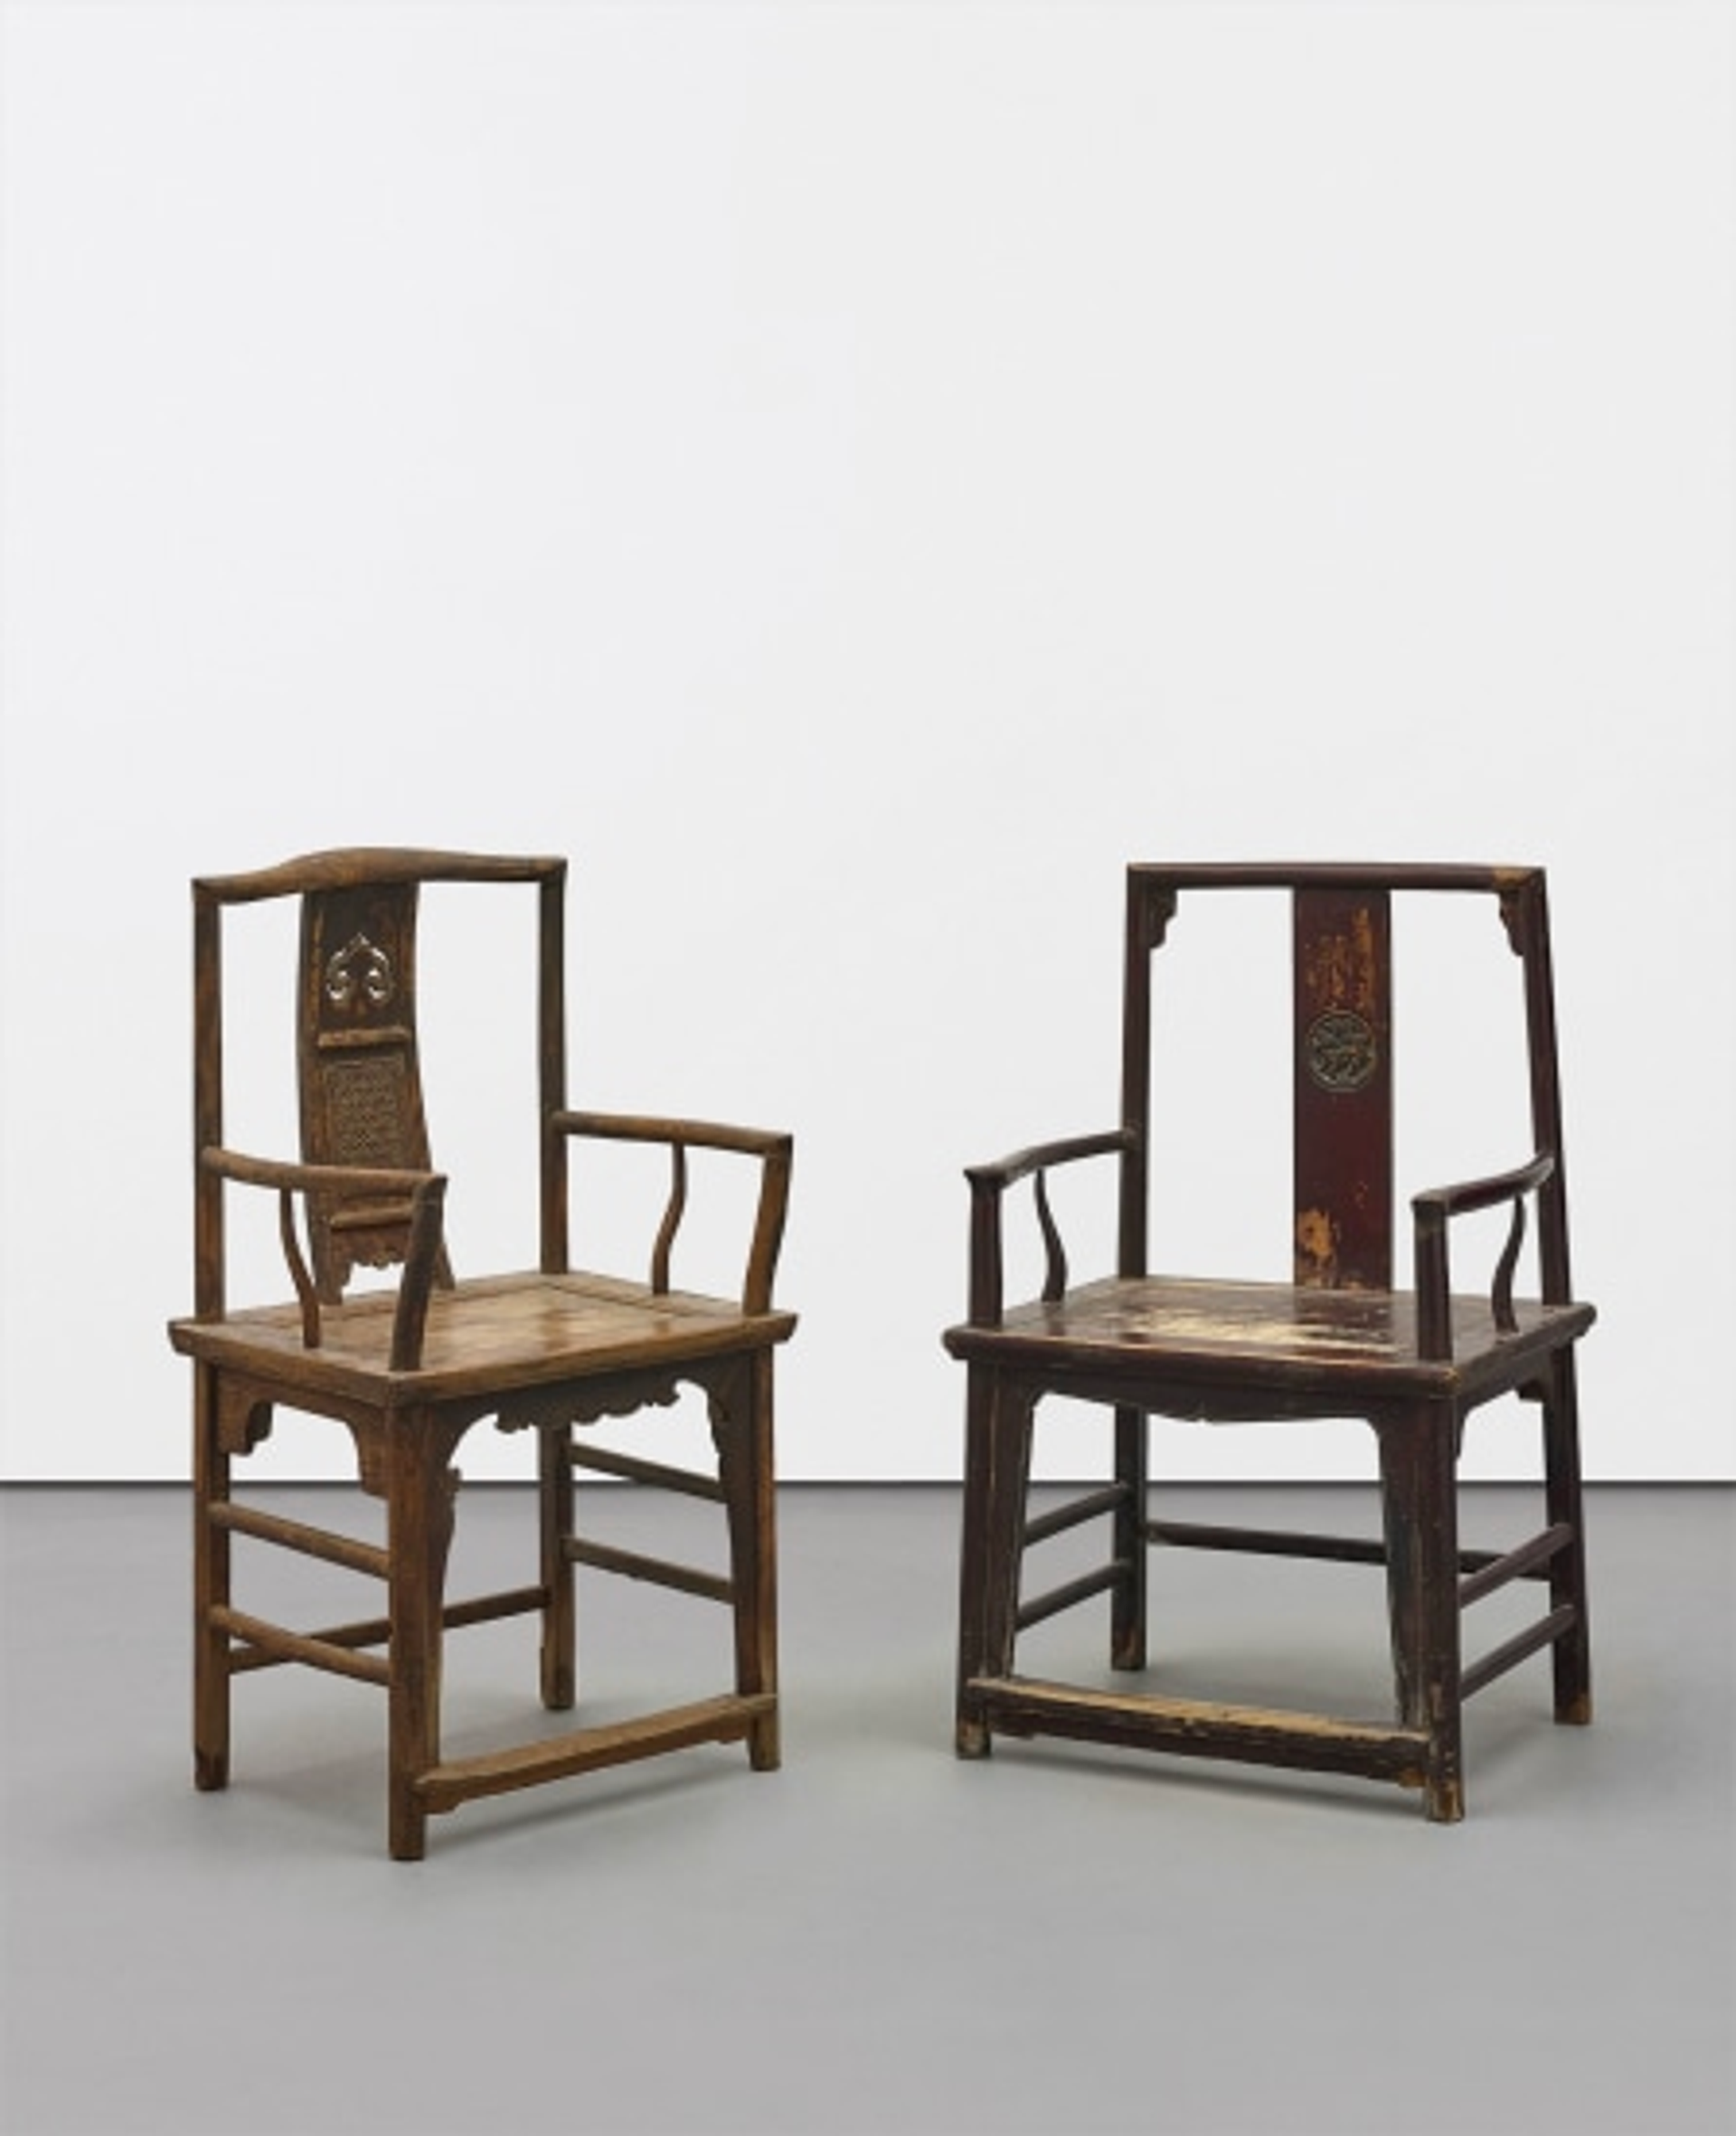 Two empty wooden chairs with ornate details displayed in gallery